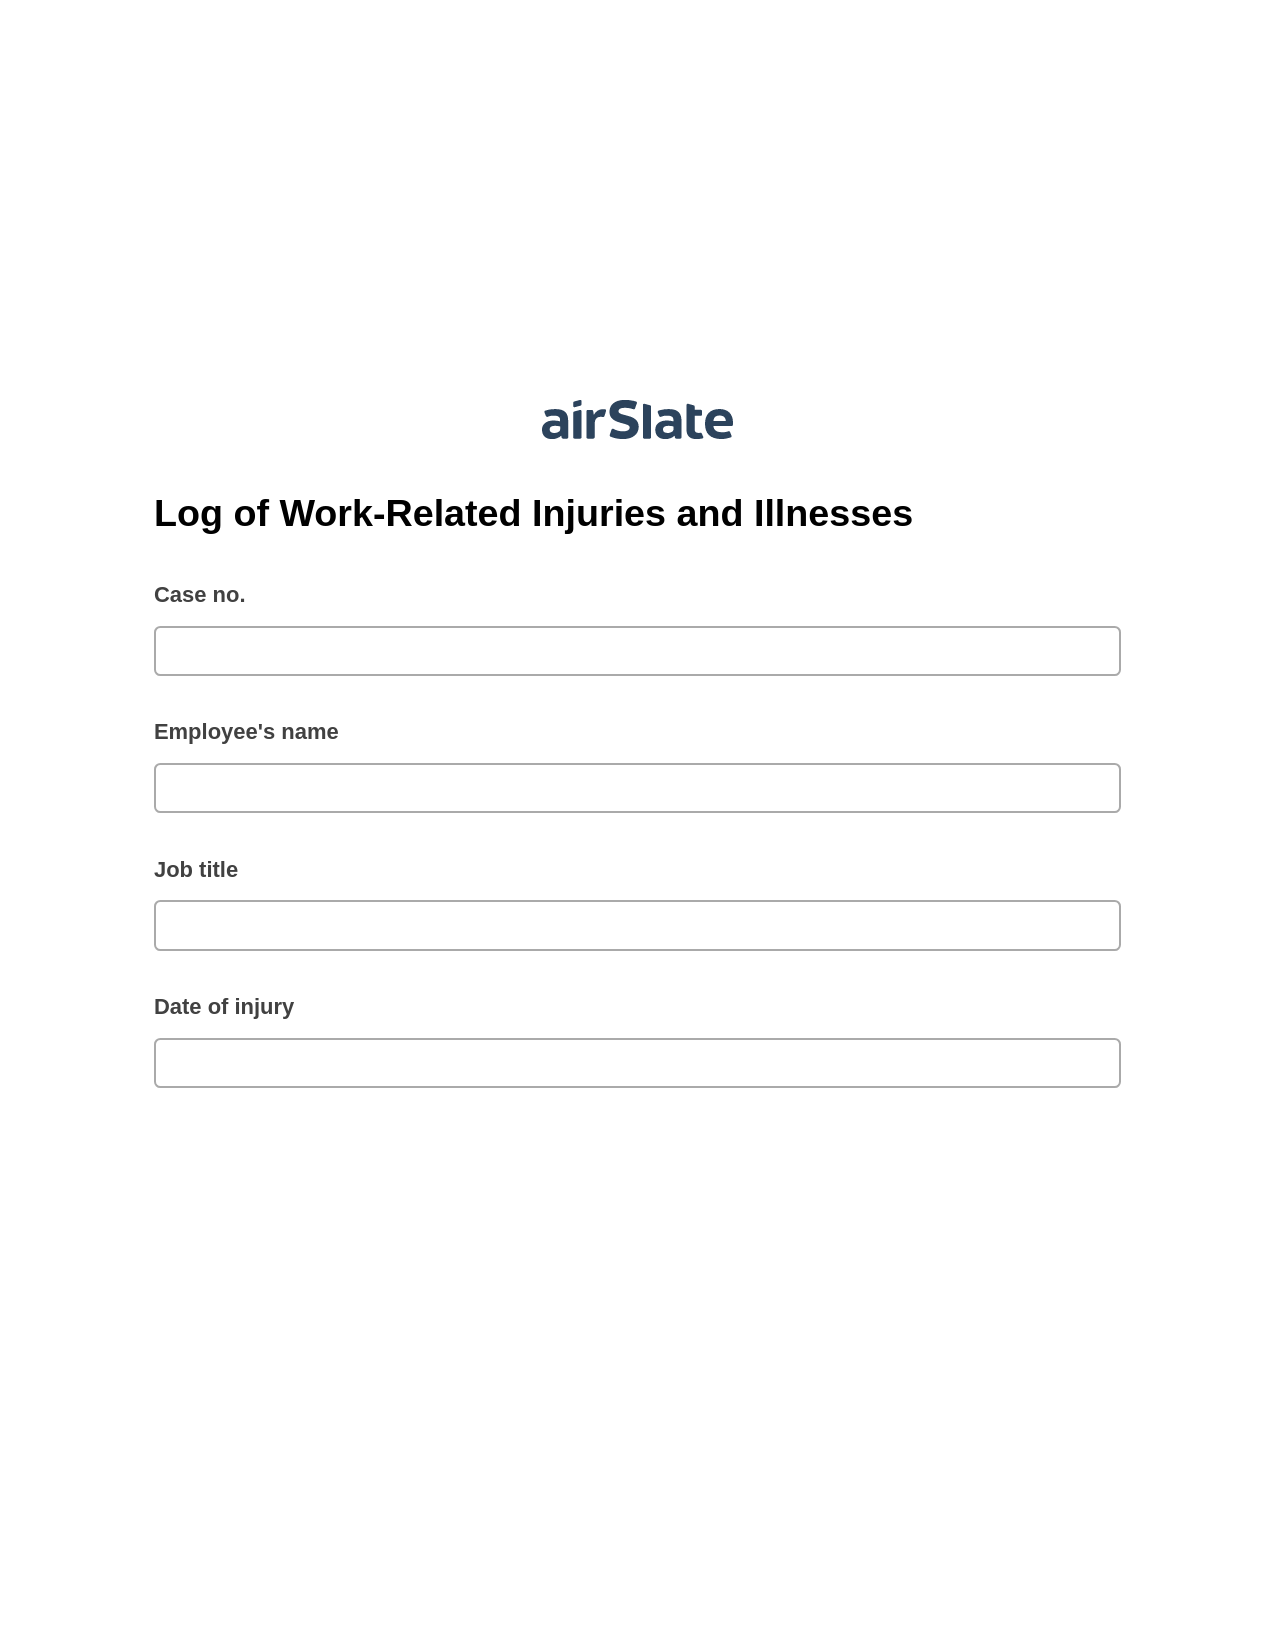 Log of Work-Related Injuries and Illnesses Pre-fill from Salesforce Records with SOQL Bot, System Bot - Create a Slate in another Flow, Dropbox Bot